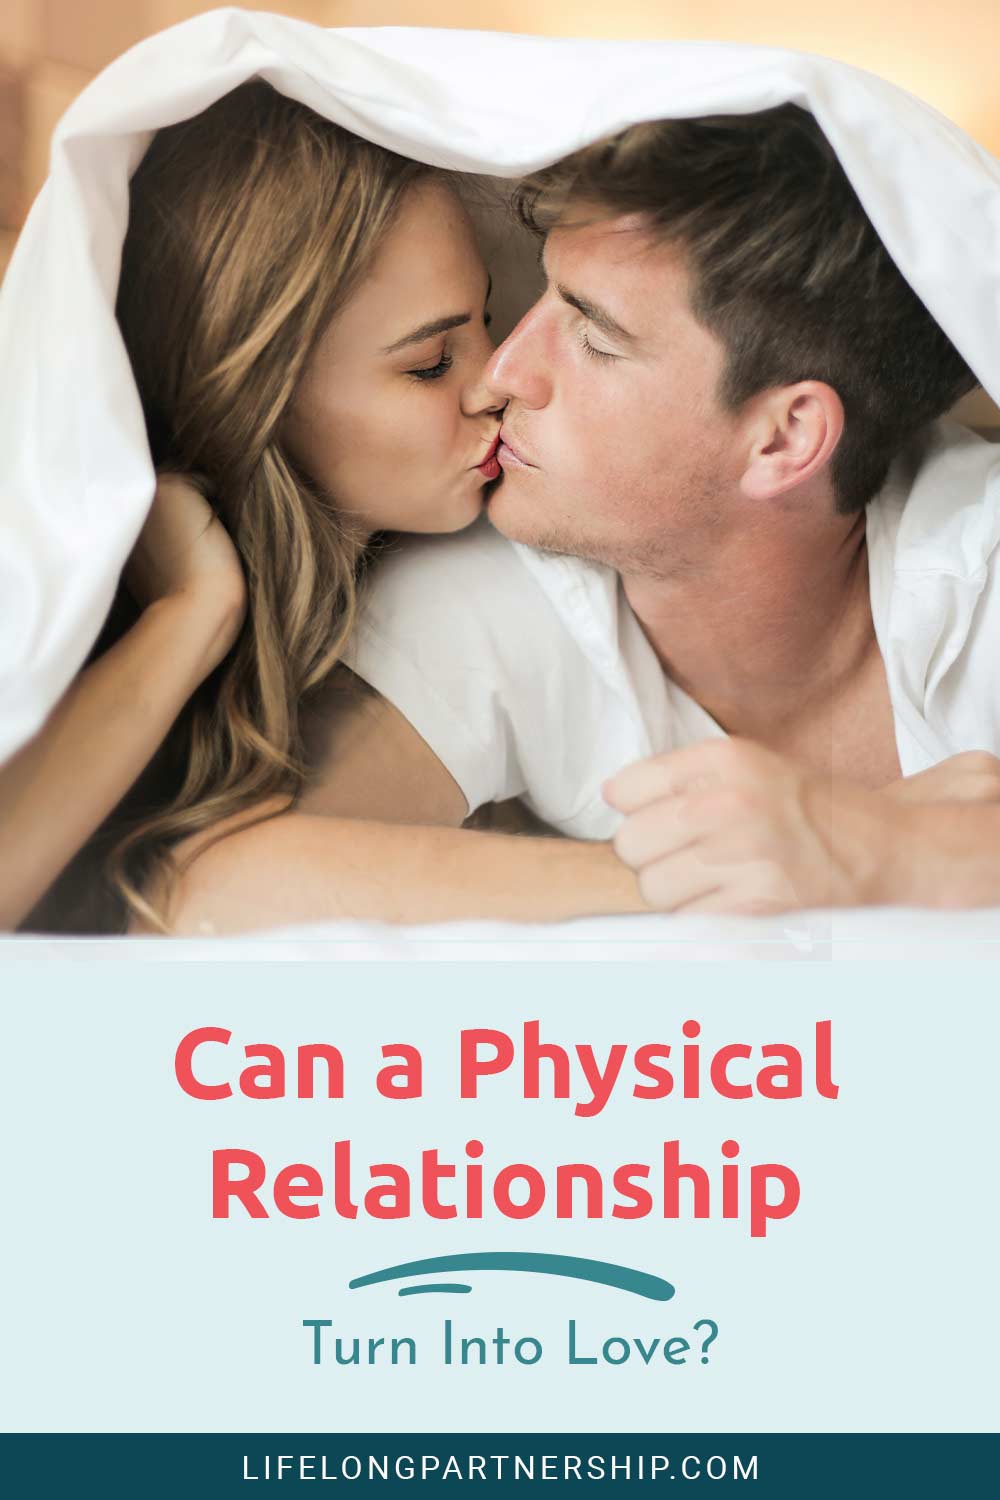 Can a Physical Relationship Turn Into Love?